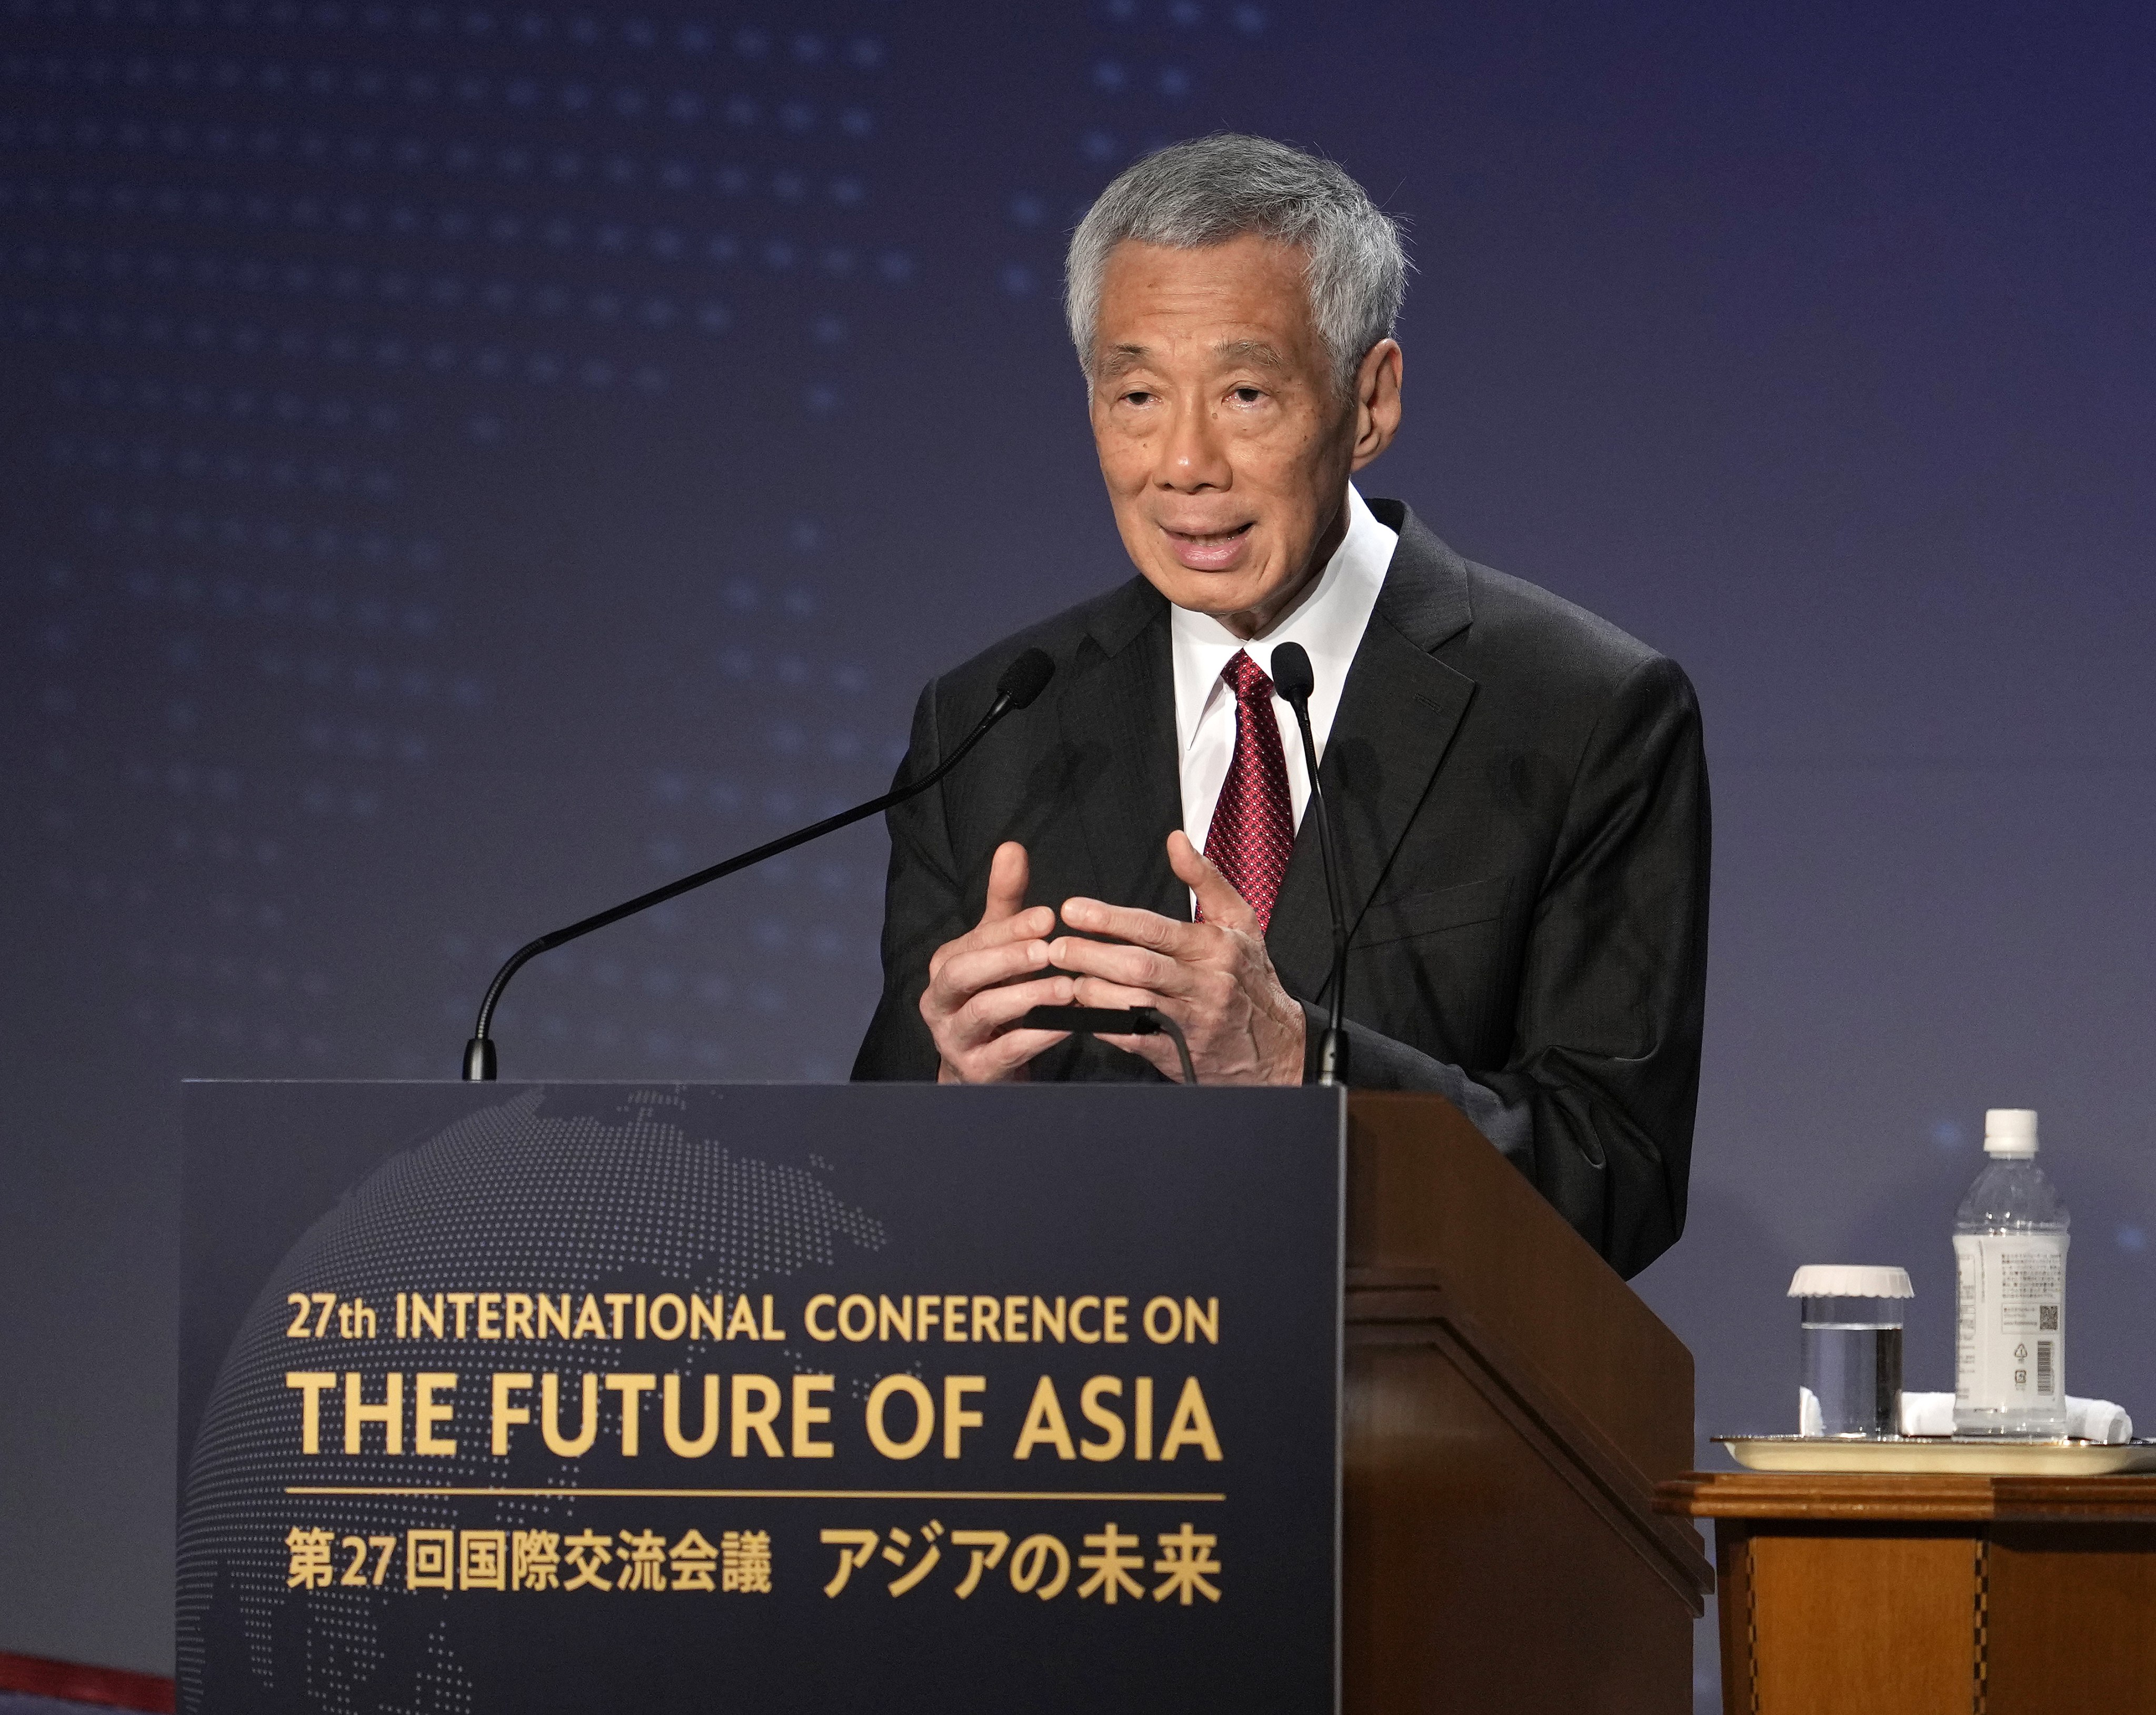 Singapore’s Prime Minister Lee Hsien Loong said he first learned about the matter in November 2020. Photo: EPA-EFE